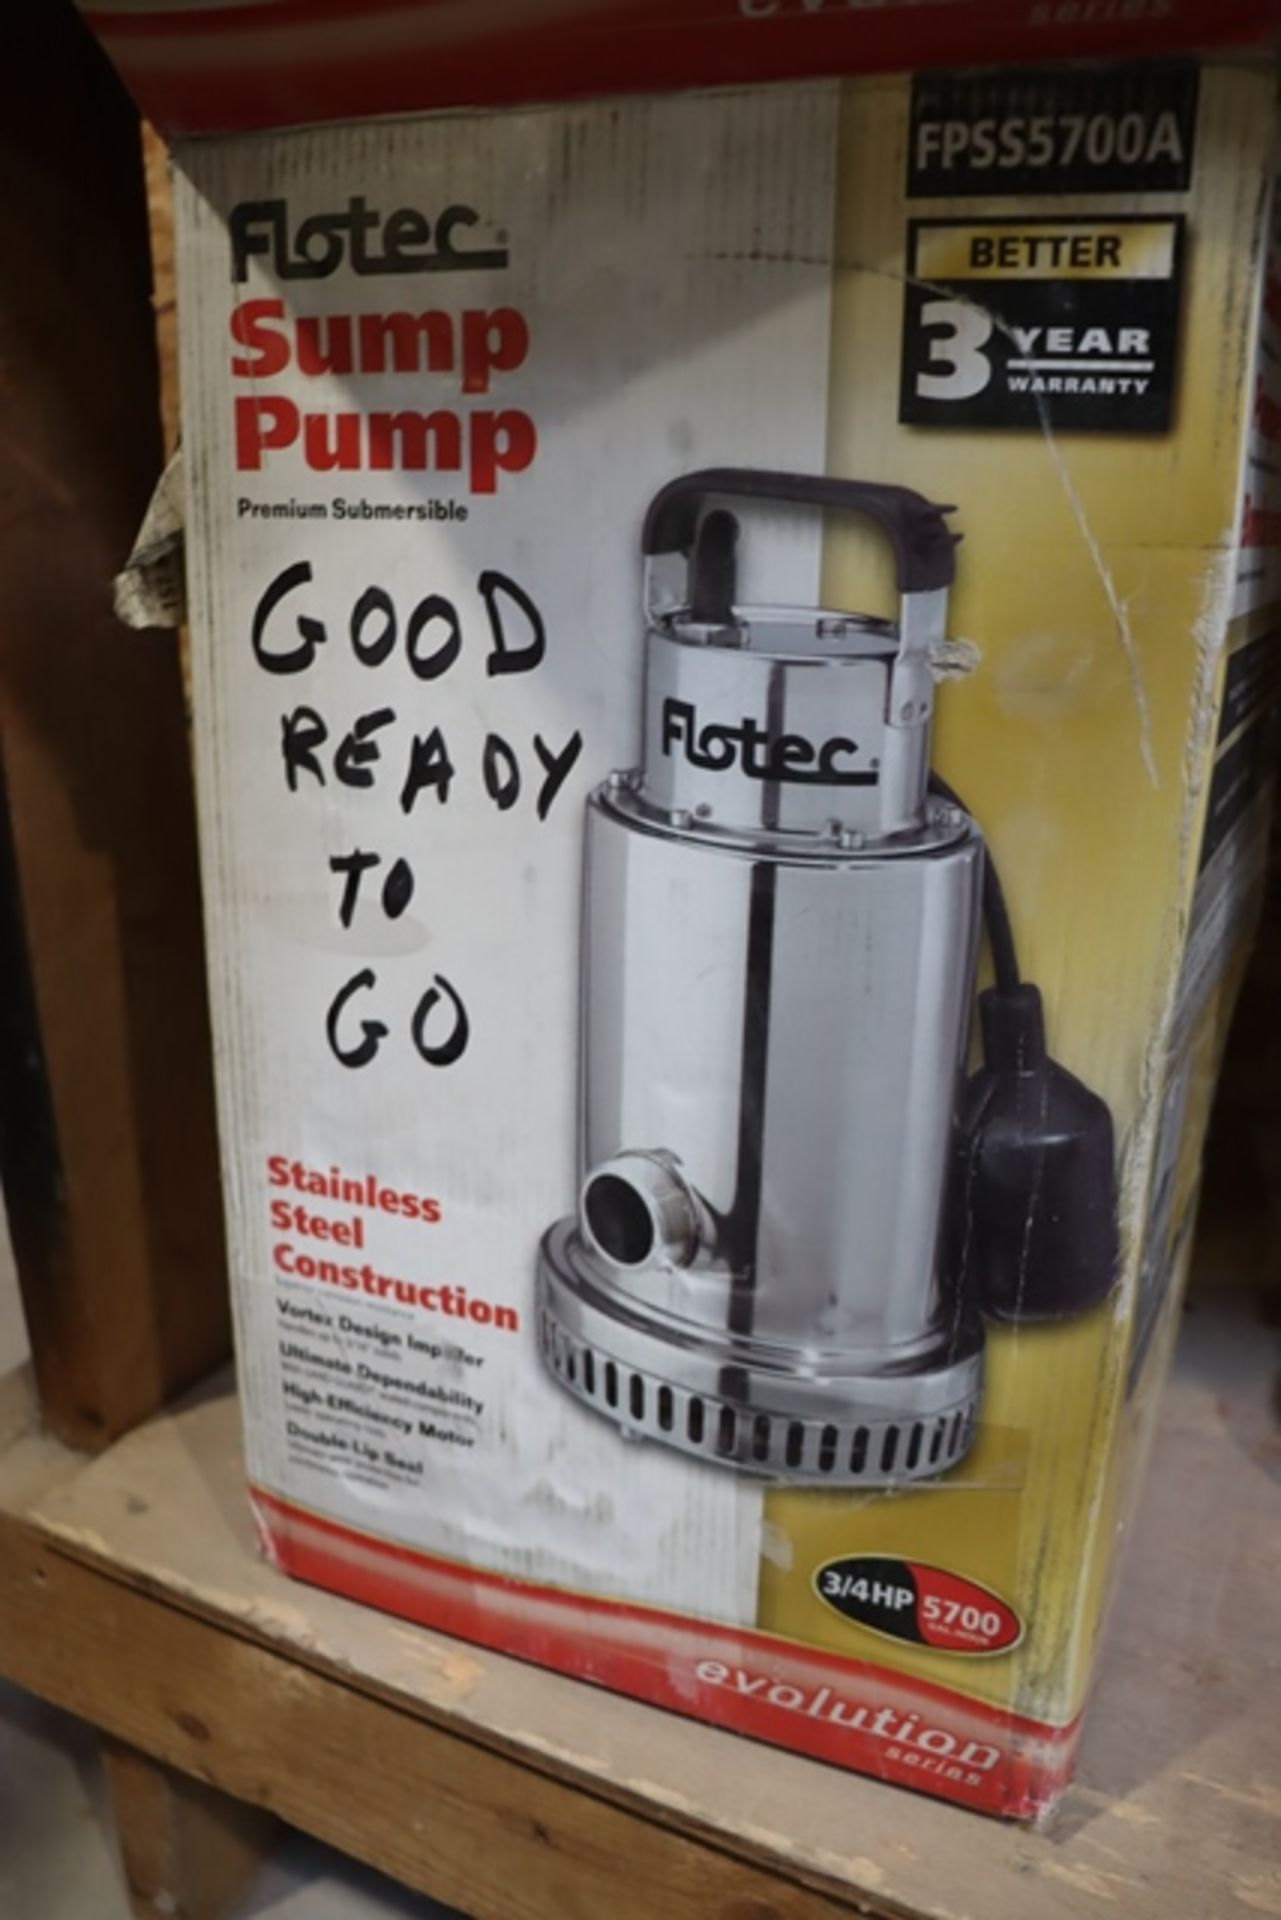 Pair to go - Flotec and other sump pumps - Image 4 of 4